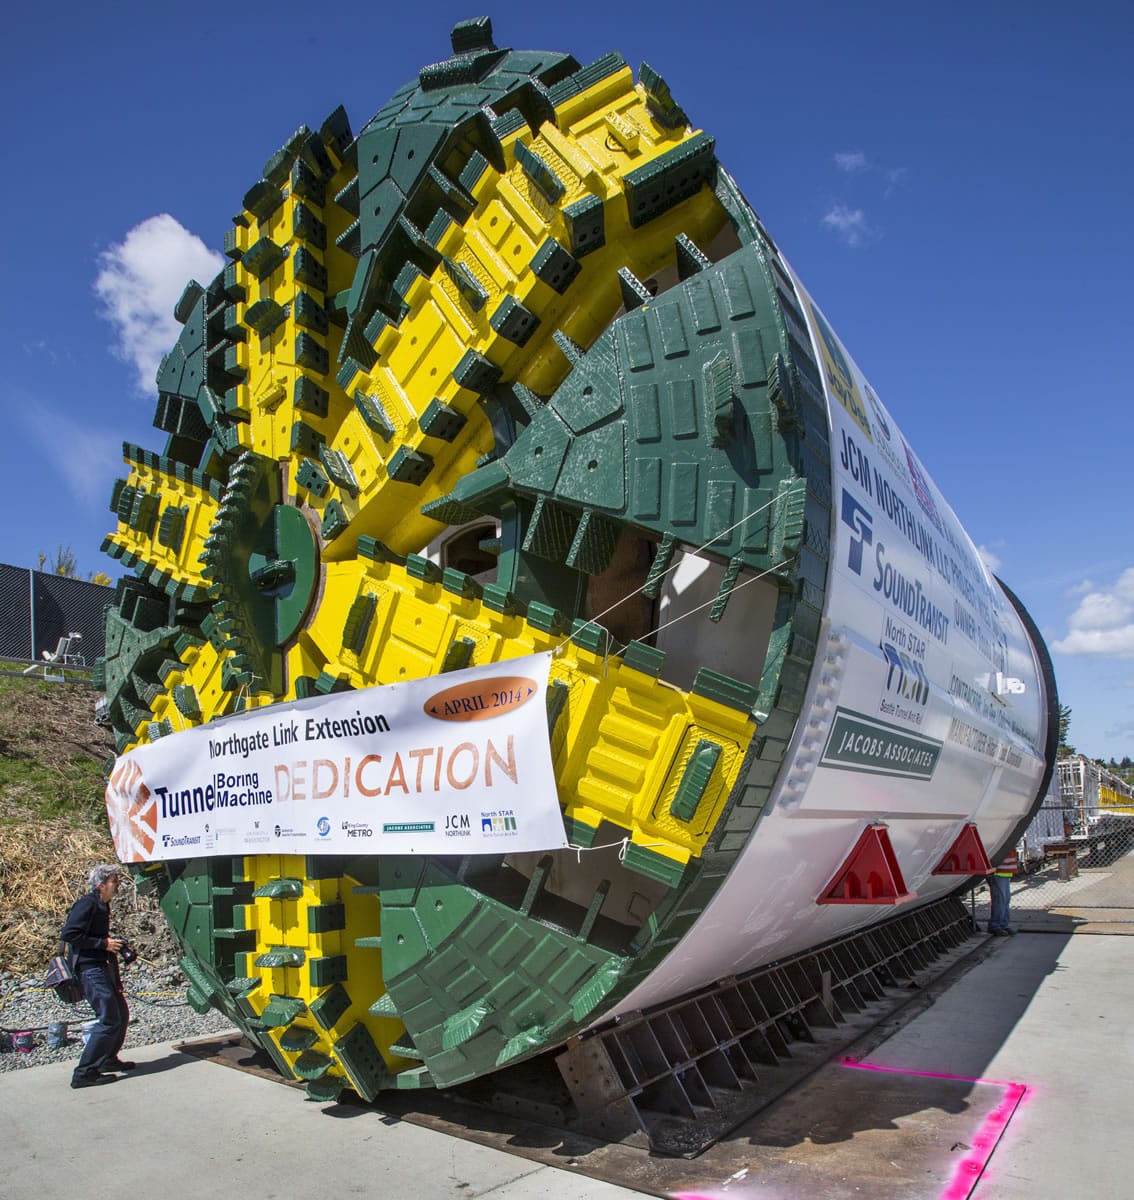 A news photographer is dwarfed by the Northgate Link light rail tunnel boring machine that was dedicated Monday afternoon and will be launched to drill the southbound tunnel from the Northgate portal to Husky Stadium this summer.